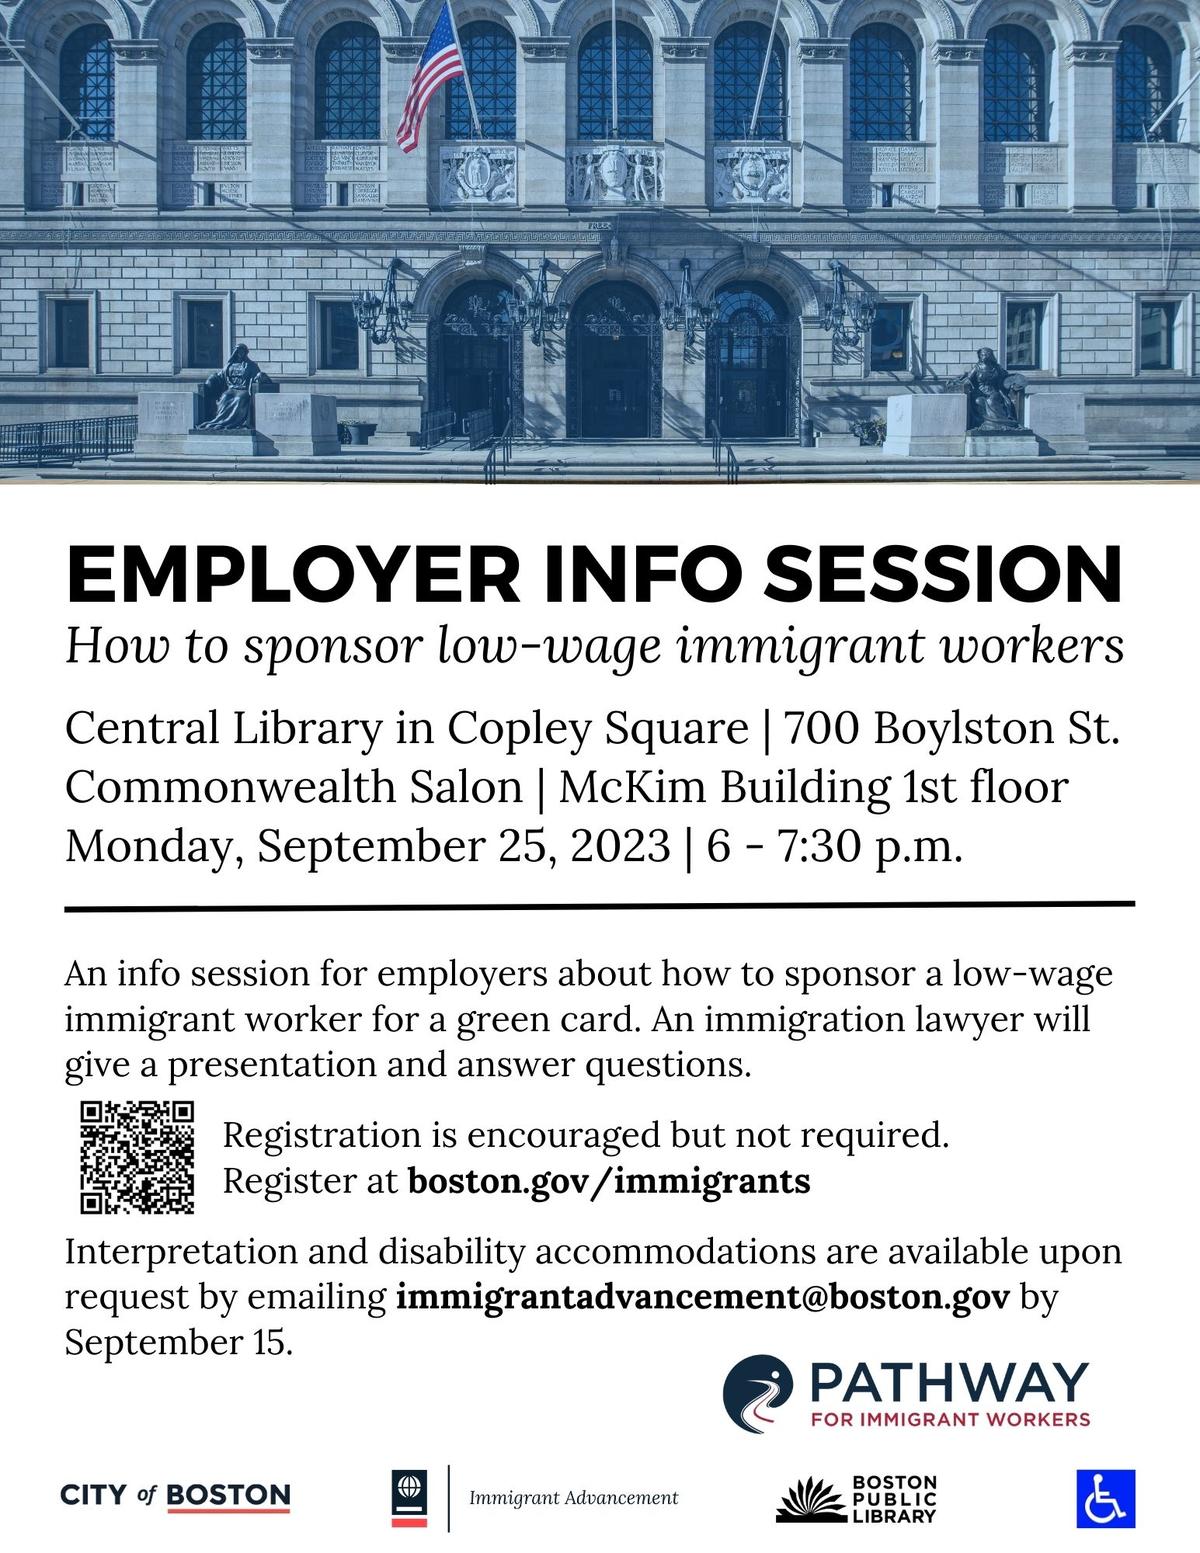 Flyer for an employer info session about how to sponsor low-wage immigrant workers. On Monday, September 25, 2023 from 6-7:30pm